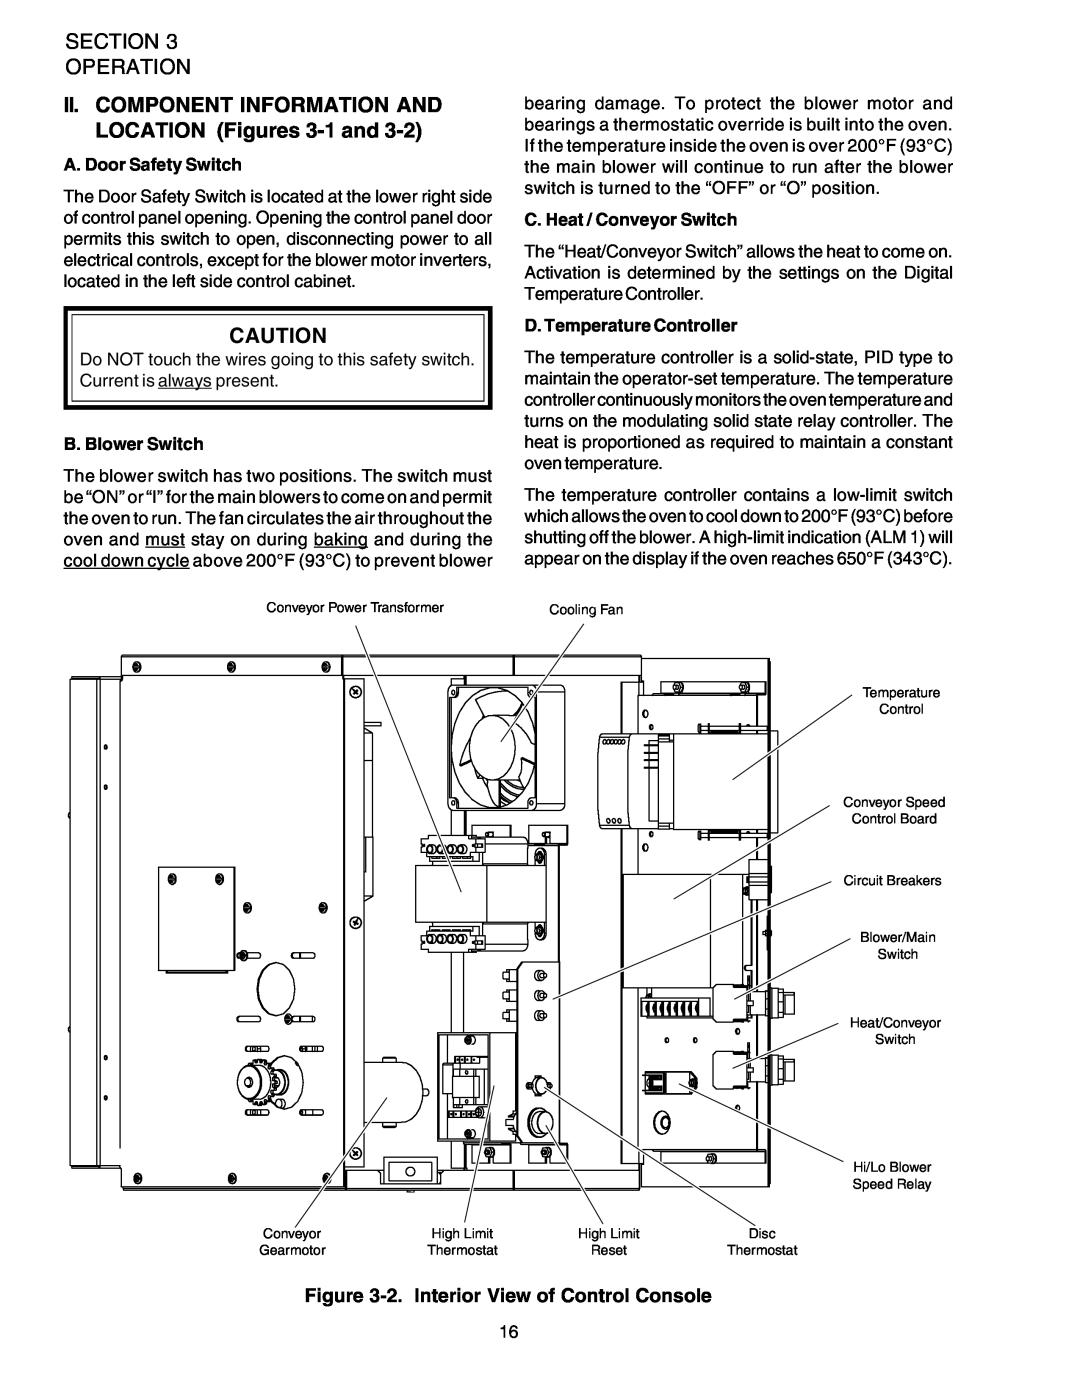 Middleby Marshall PS624E II. COMPONENT INFORMATION AND LOCATION Figures 3-1 and, Section Operation, A. Door Safety Switch 